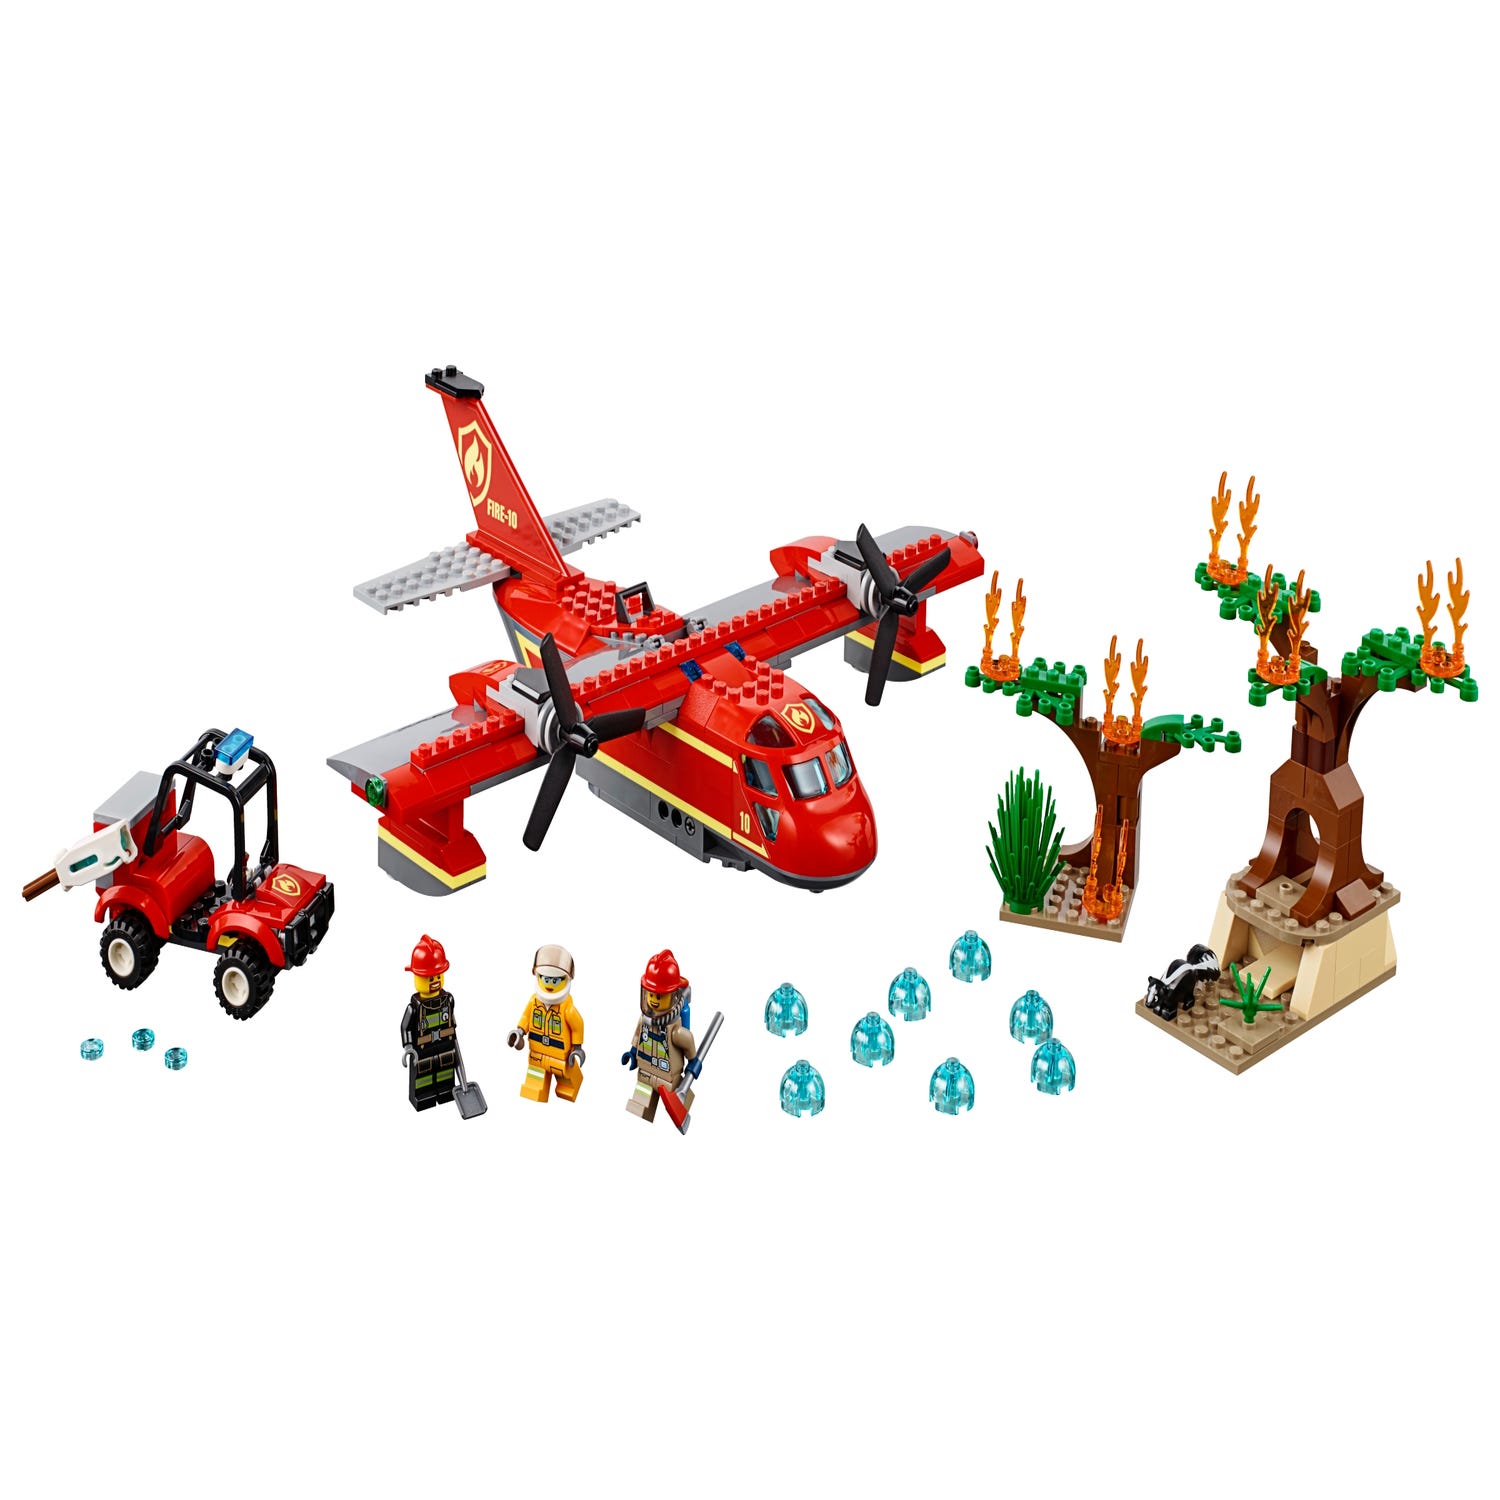 Fire Plane 60217 | City | Buy the Official LEGO® US